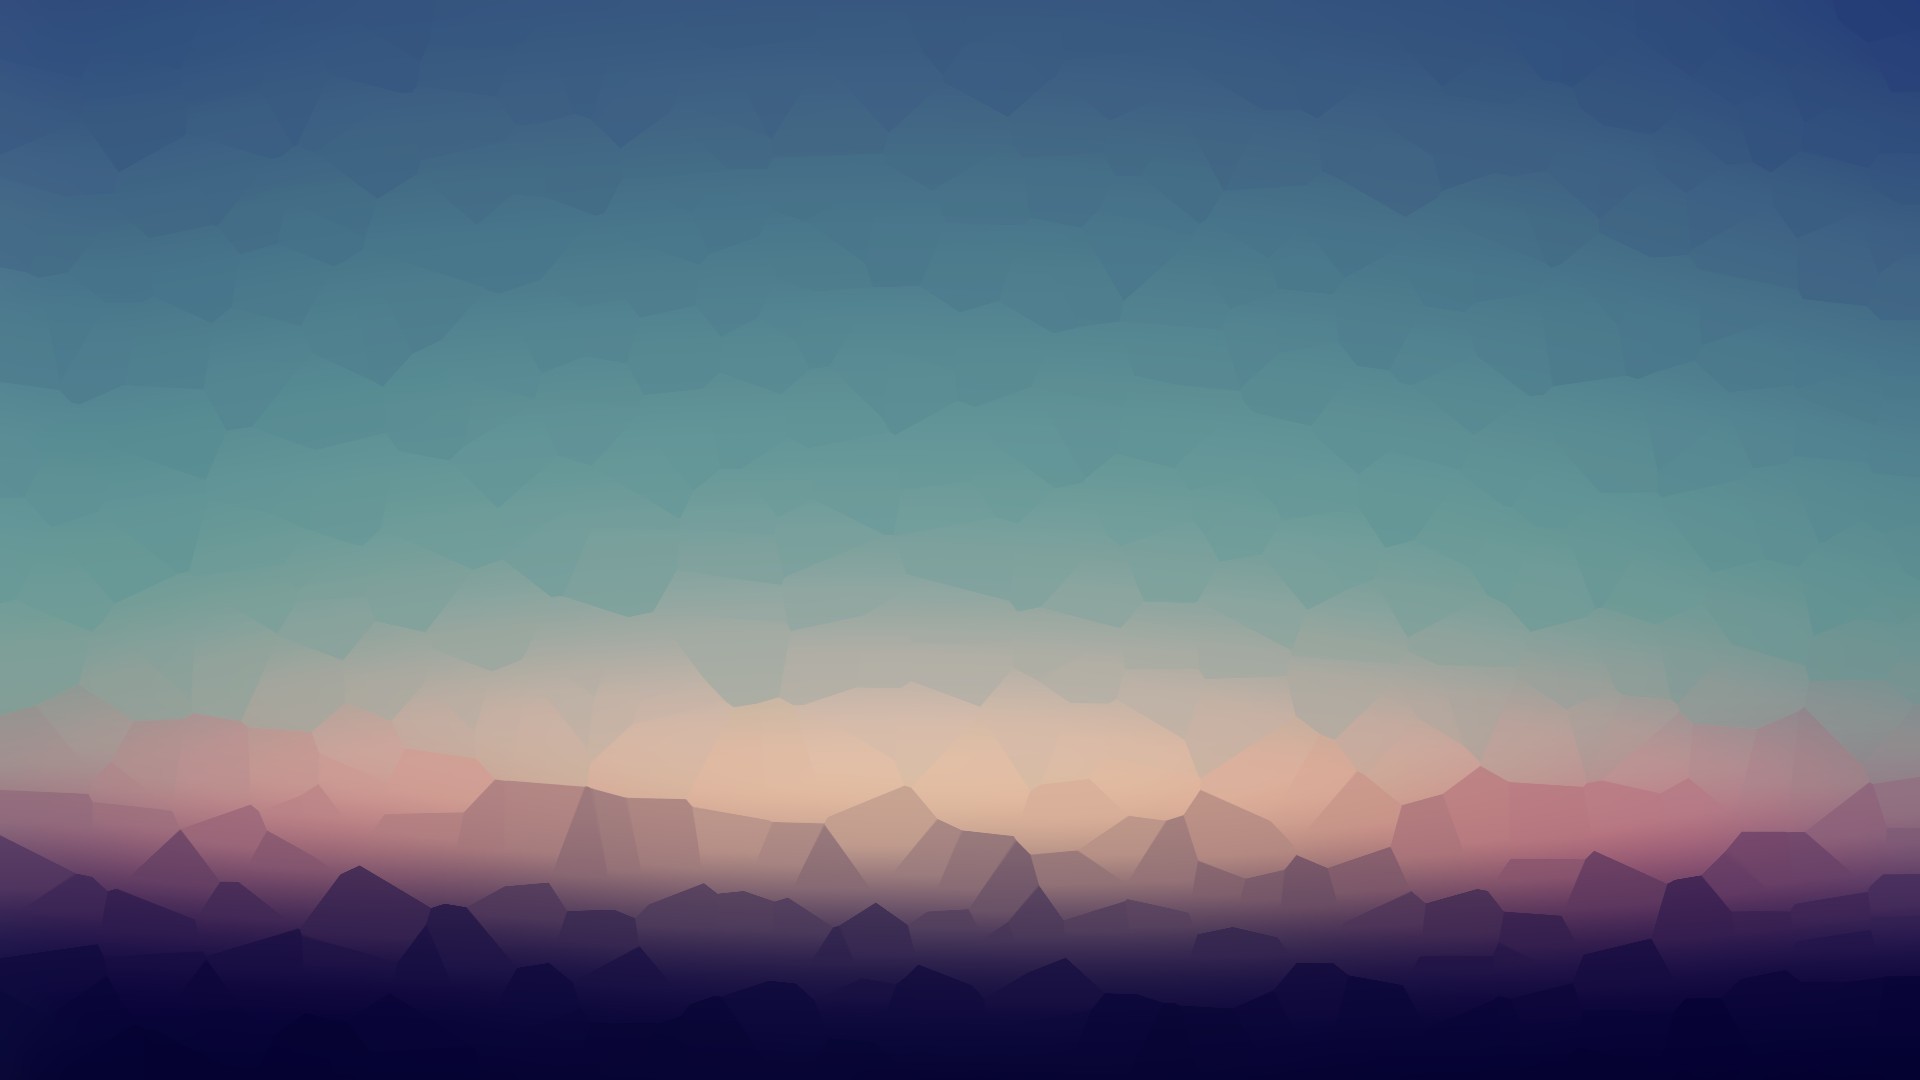  Free Simple Wallpaper Backgrounds For Your Desktop